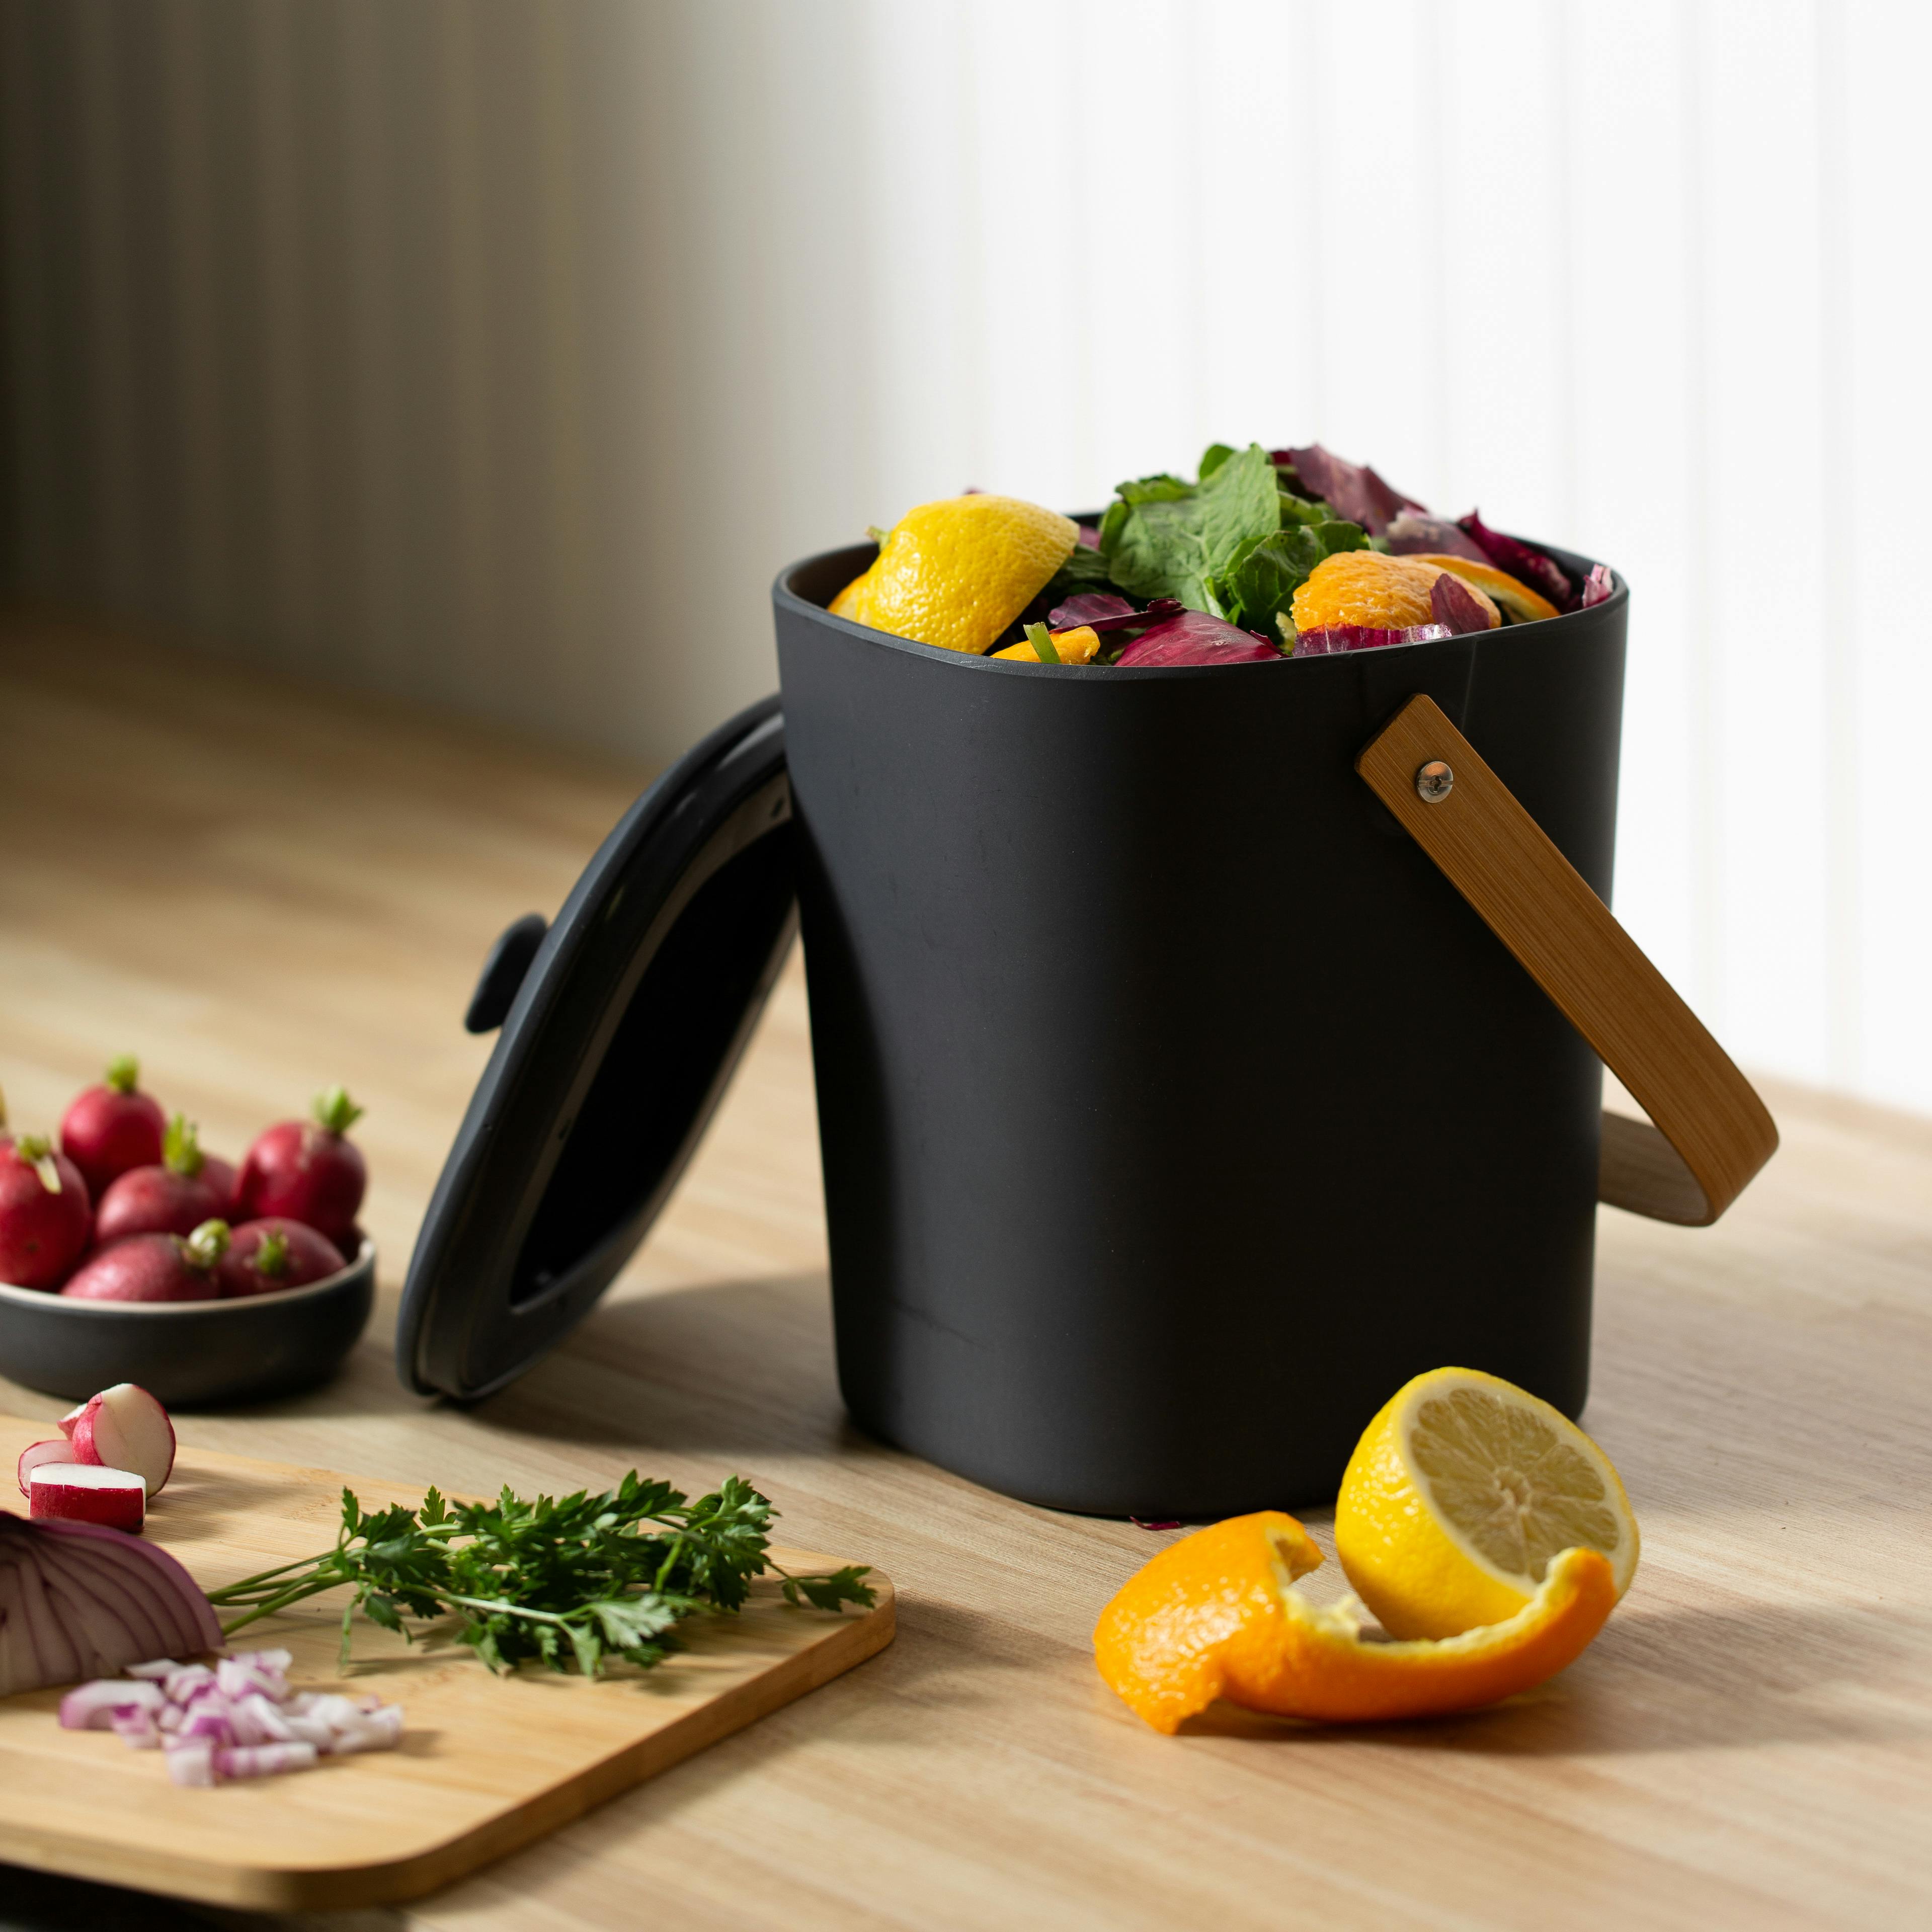 https://huckberry.imgix.net/spree/products/585063/original/eoNEtPpBnx_bamboo-composter_countertop_composter_for-the-home-chef_2_original.jpg?auto=format%2C%20compress&crop=top&fit=clip&cs=tinysrgb&ixlib=react-9.5.2